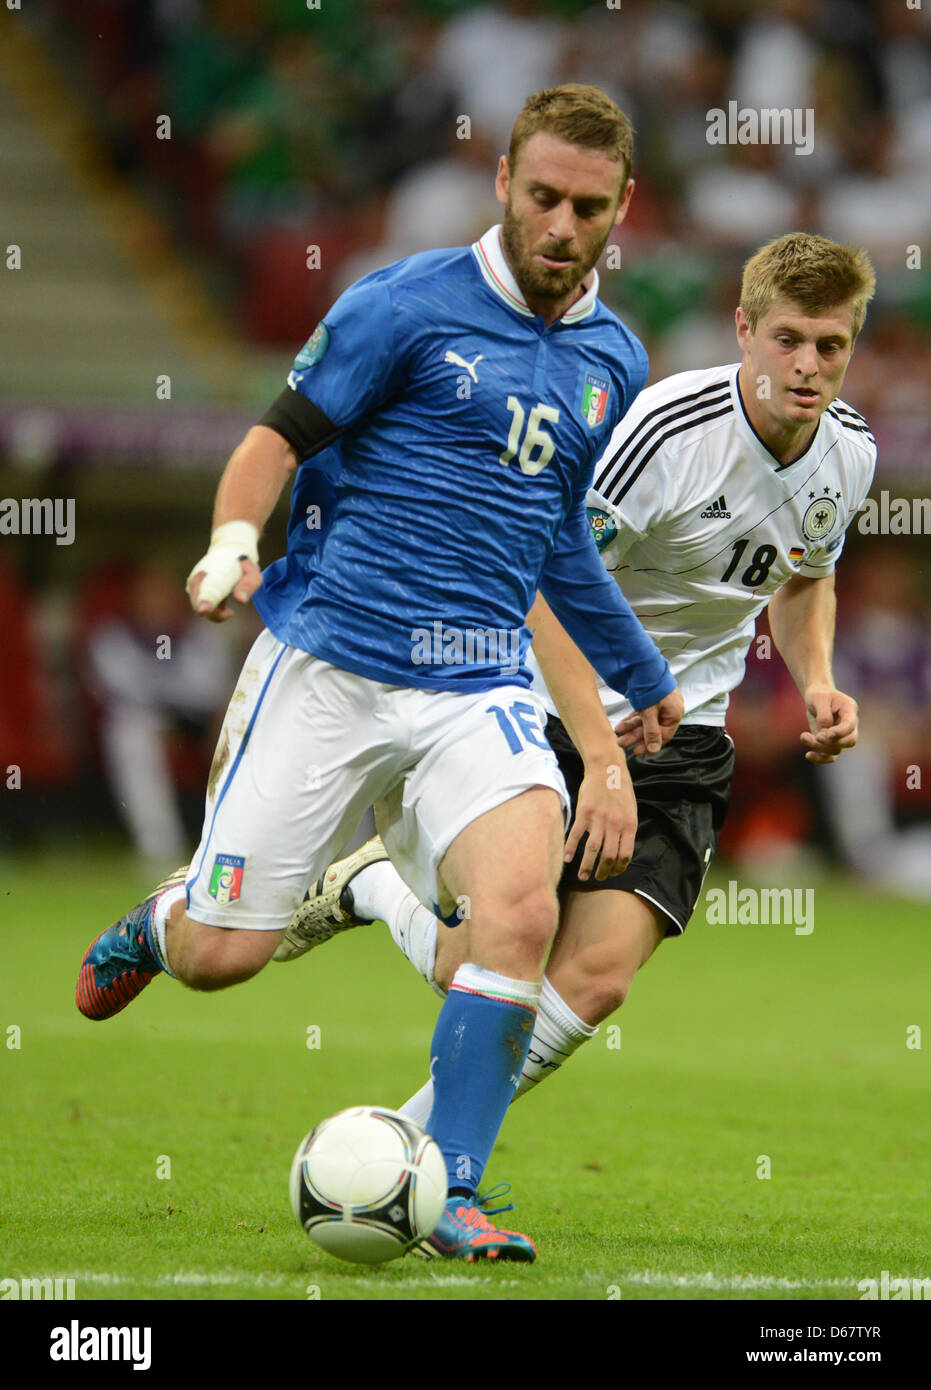 Ortografía Resonar Alerta Germany's Toni Kroos (R) and Italy's Daniele De Rossi vie for the ball  during the UEFA EURO 2012 semi-final soccer match Germany vs. Italy at the  National Stadium in Warsaw, Poland, 28